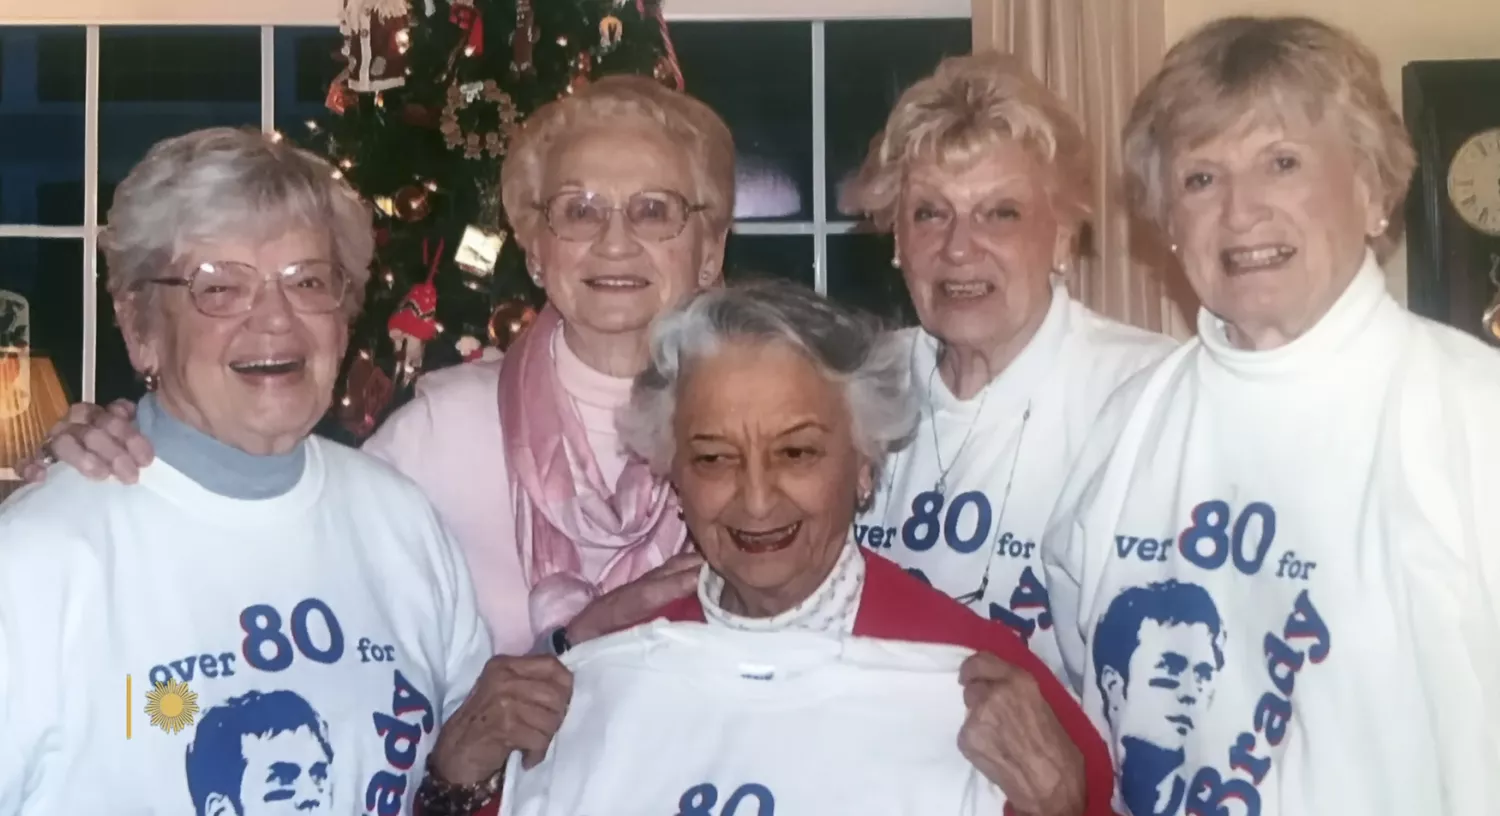 The Real life '80 for Brady' women